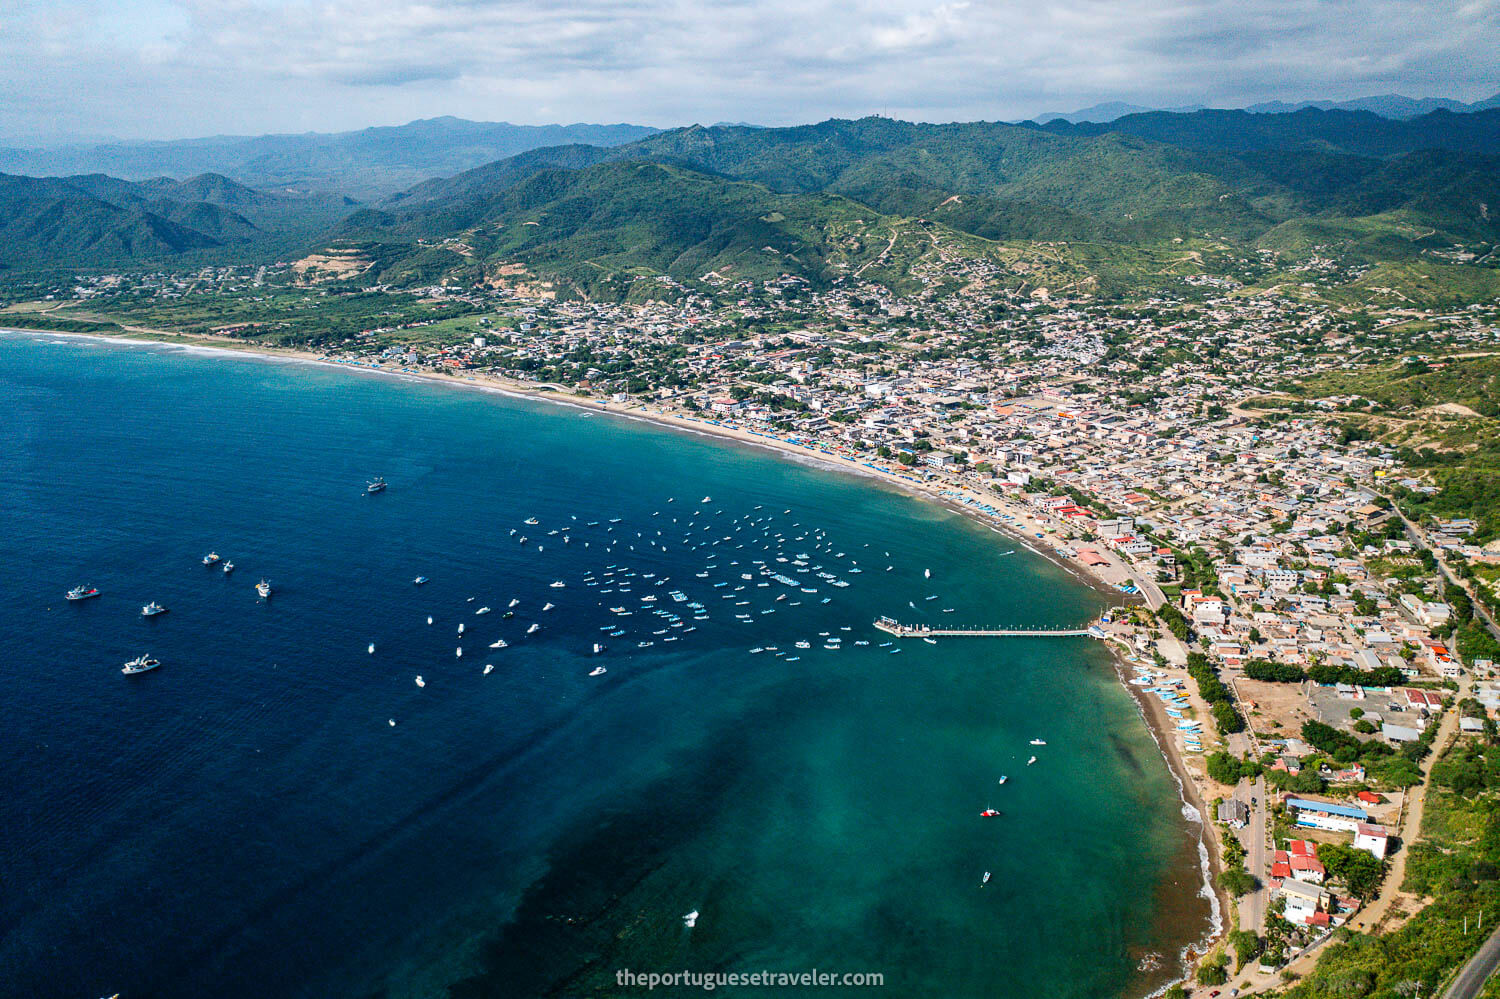 Puerto Lopez turquoise waters from the sky